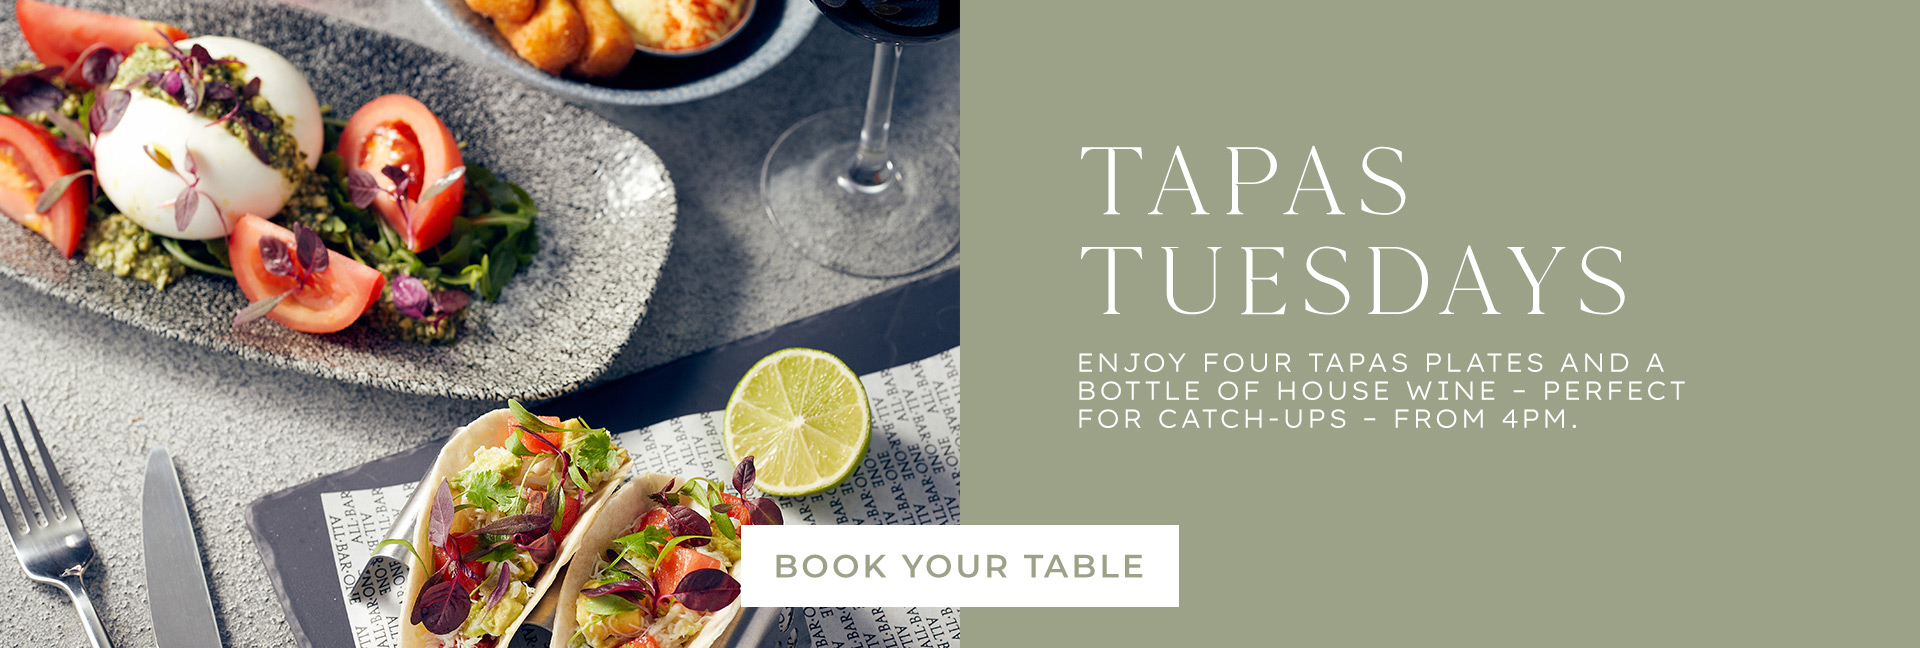 Tapas Tuesday at All Bar One Covent Garden - Book now